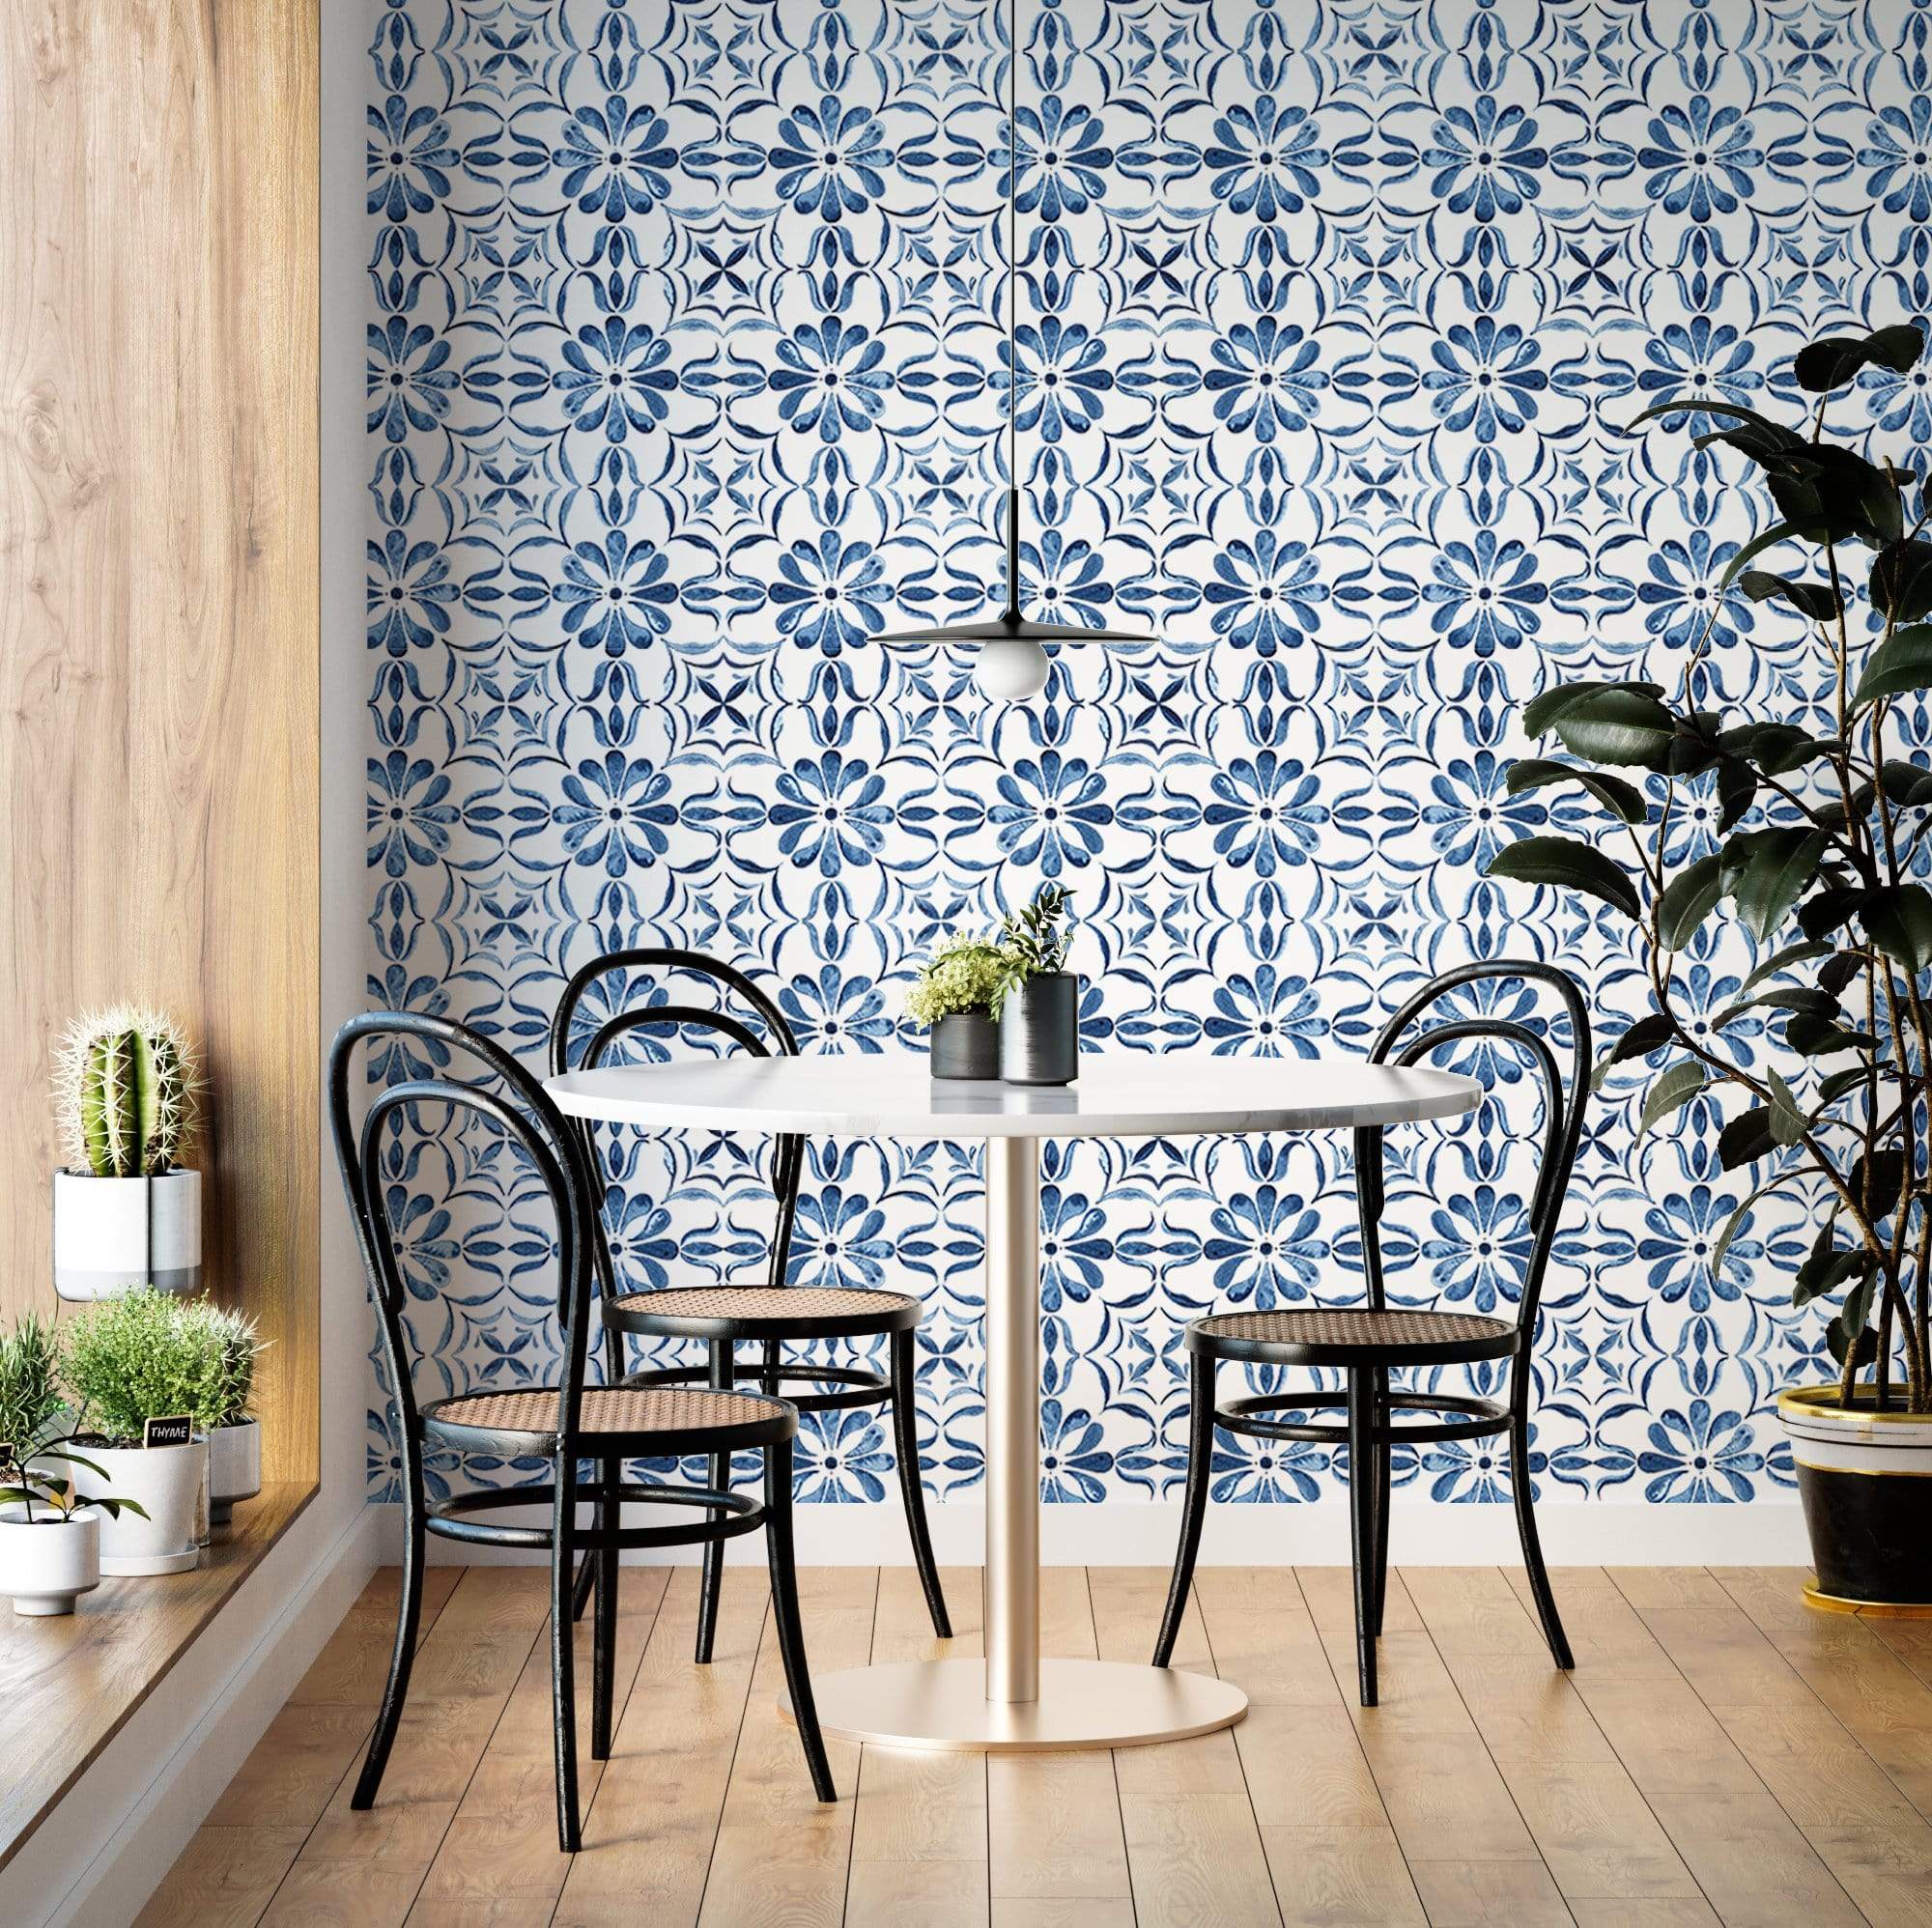 Mexican tile in blue removable wallpaper â muse wall studio